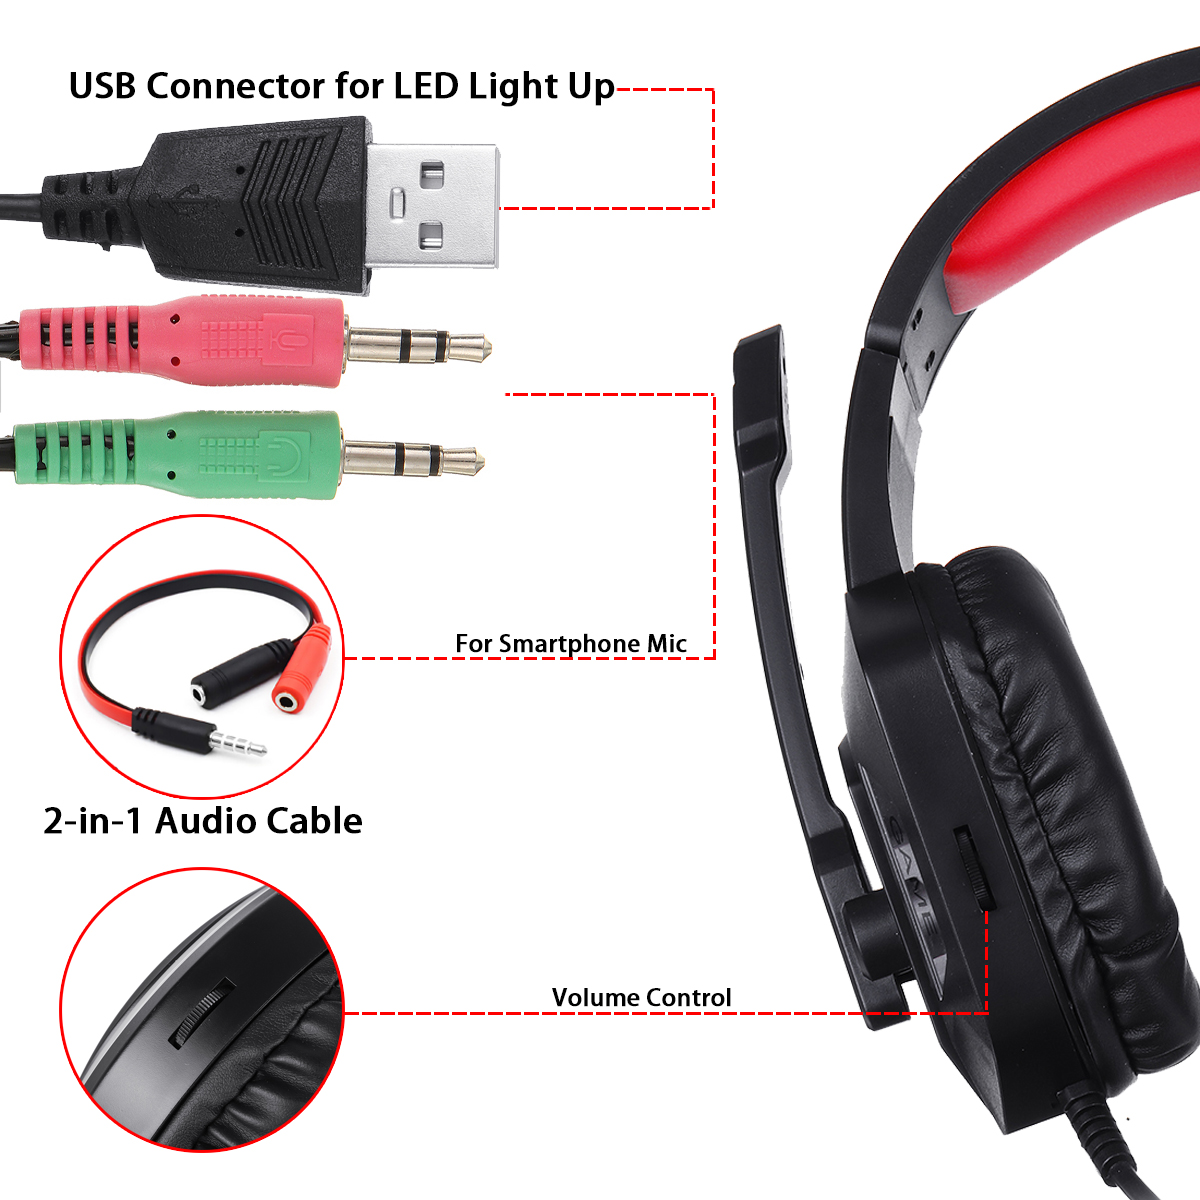 M1-Gaming-Headset-Surround-Sound-Music-Earphones-USB-71--35mm-Wired-RGB-Backlight-Game-Headphones-wi-1827492-10